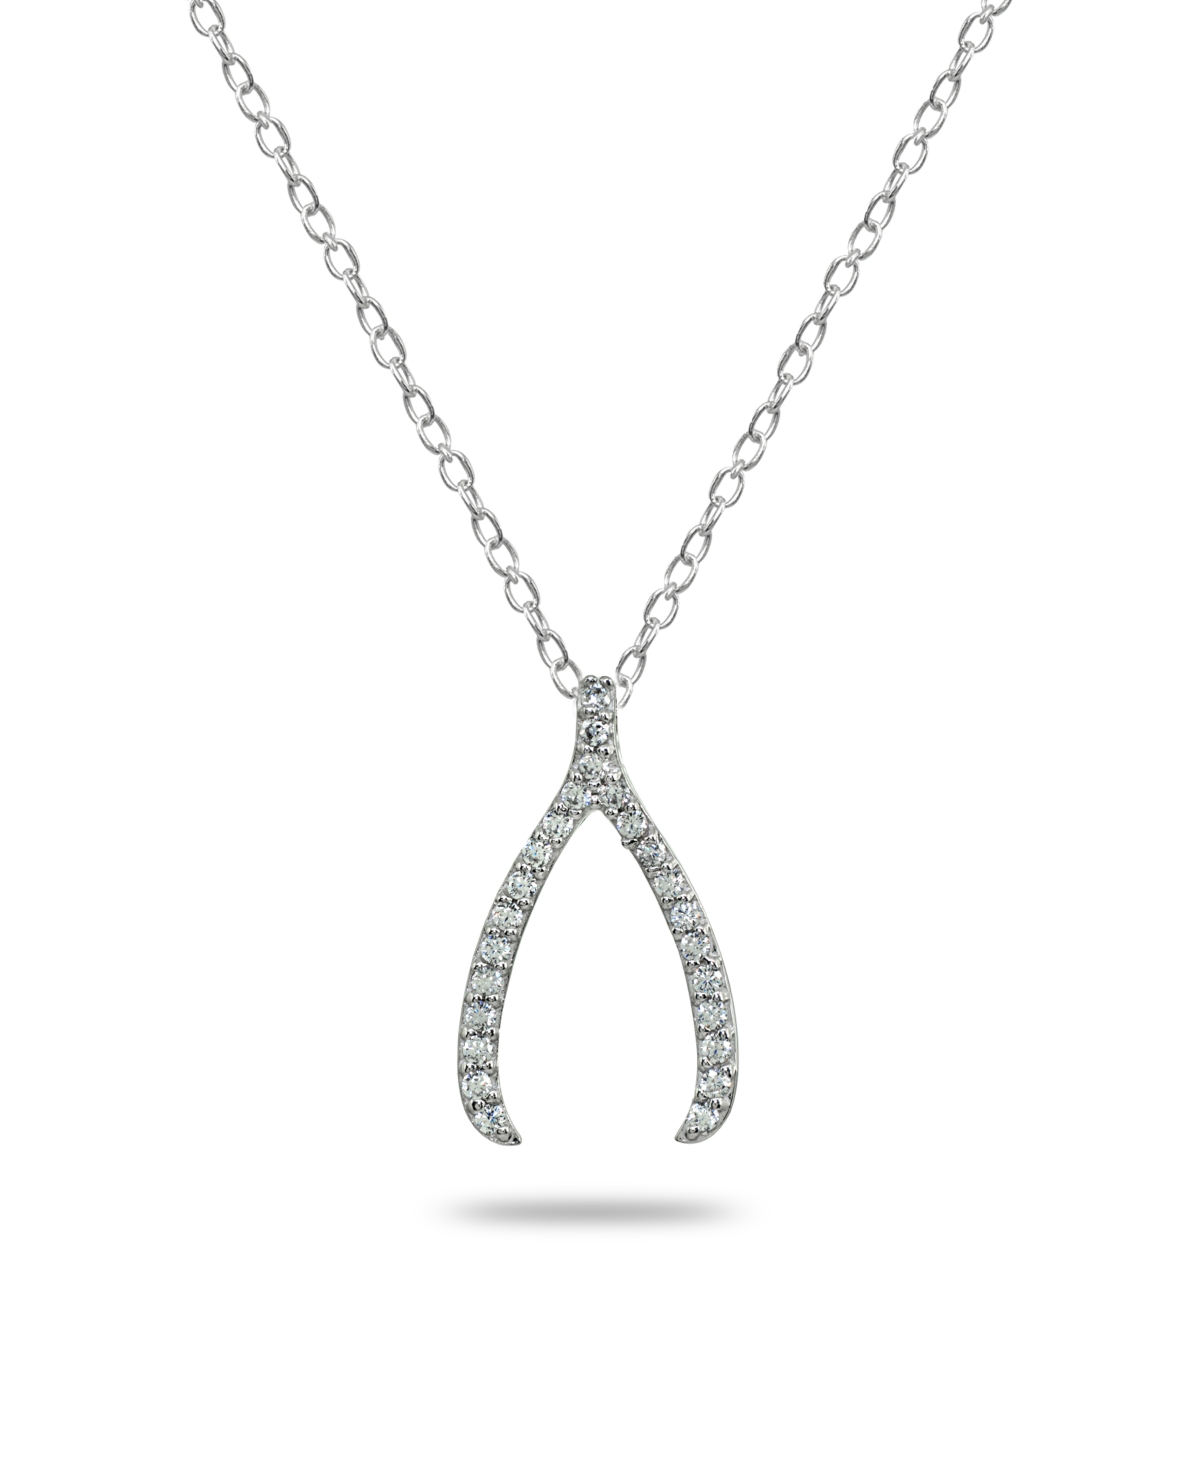 Cubic Zirconia Wishbone Slide Pendant in 18k Gold Plated Sterling Silver or Sterling Silver - Gold Over Sterling Silver